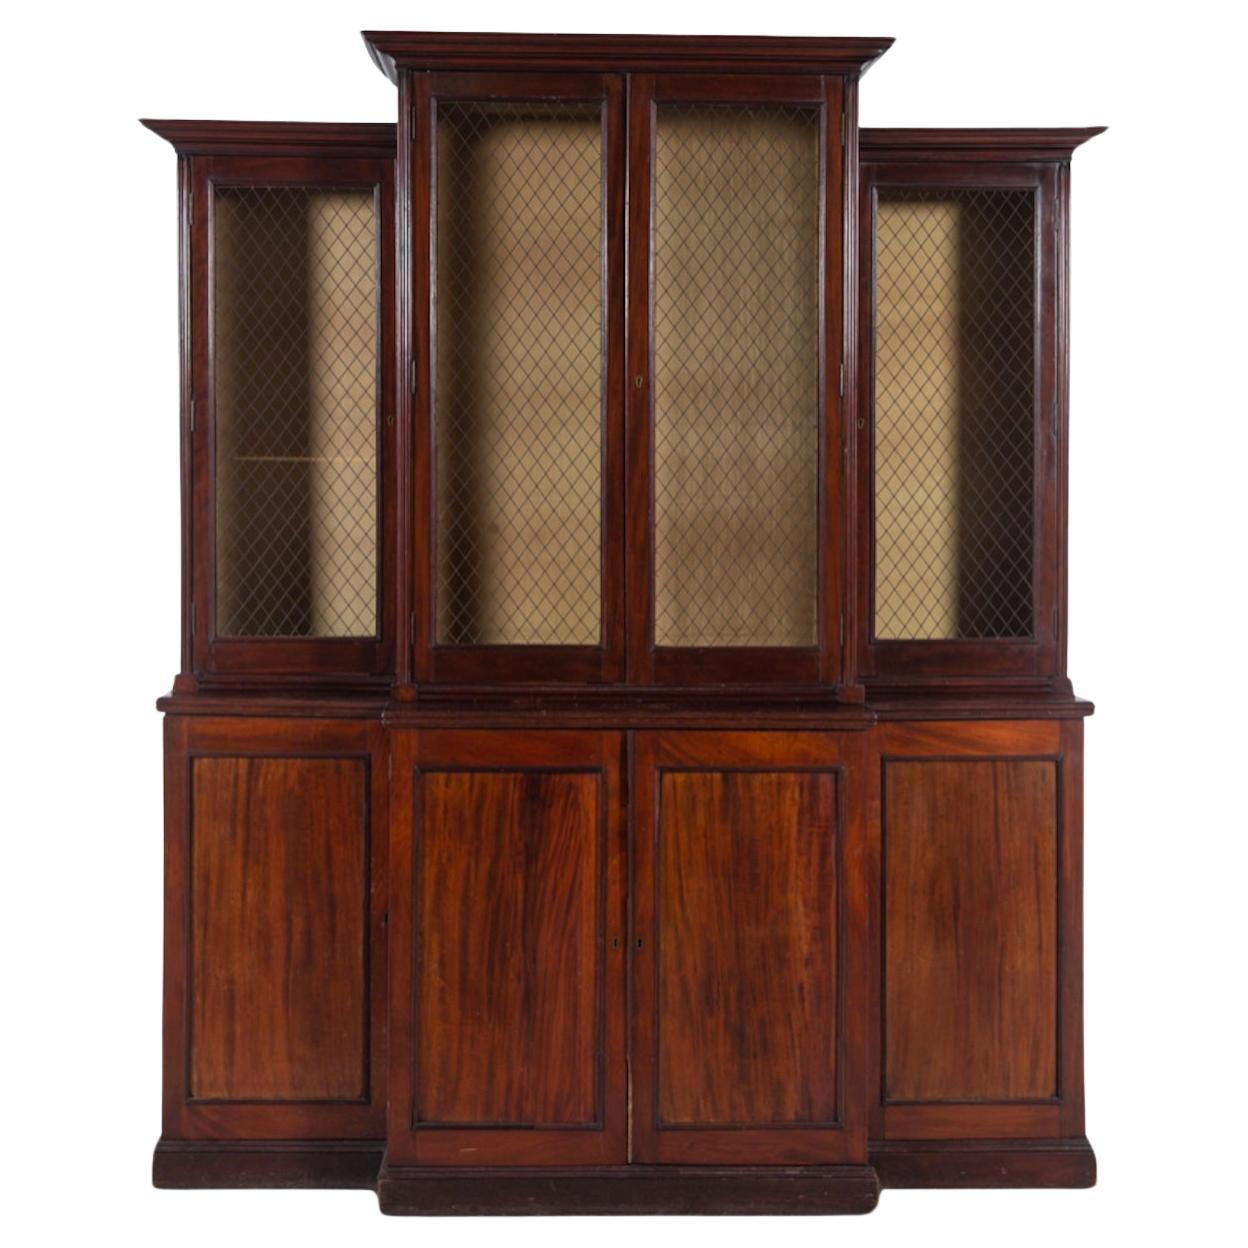 A Regency Mahogany Breakfront Bookcase 19th Century, Grilled Upper Doors. 1820 For Sale